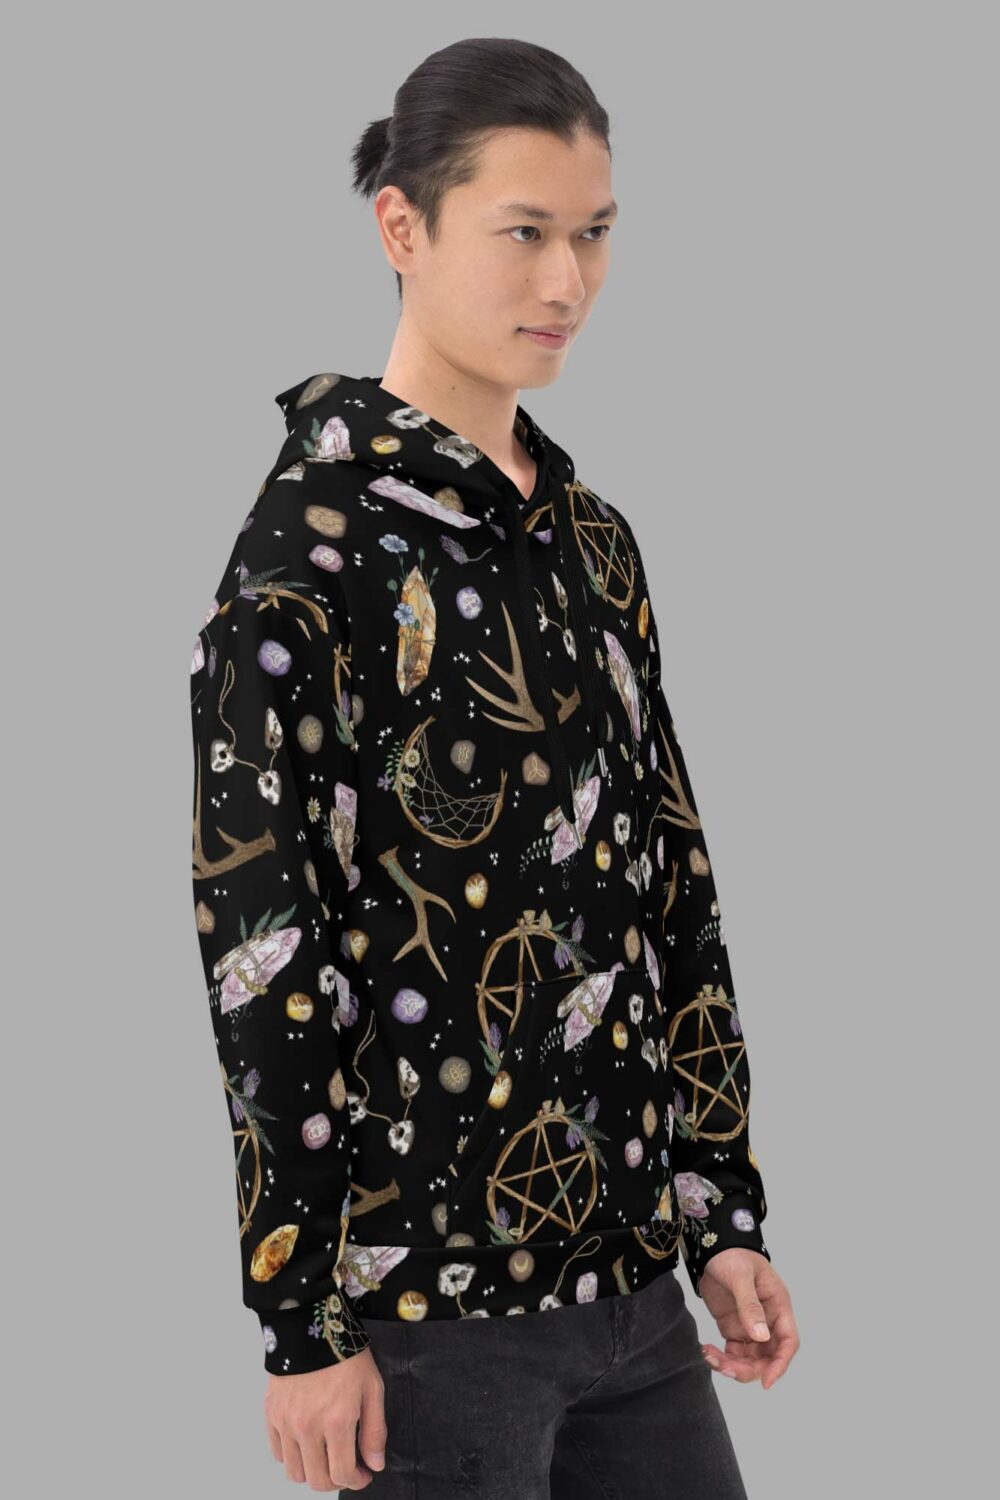 cosmic drifters hoodie side2 earth witch print